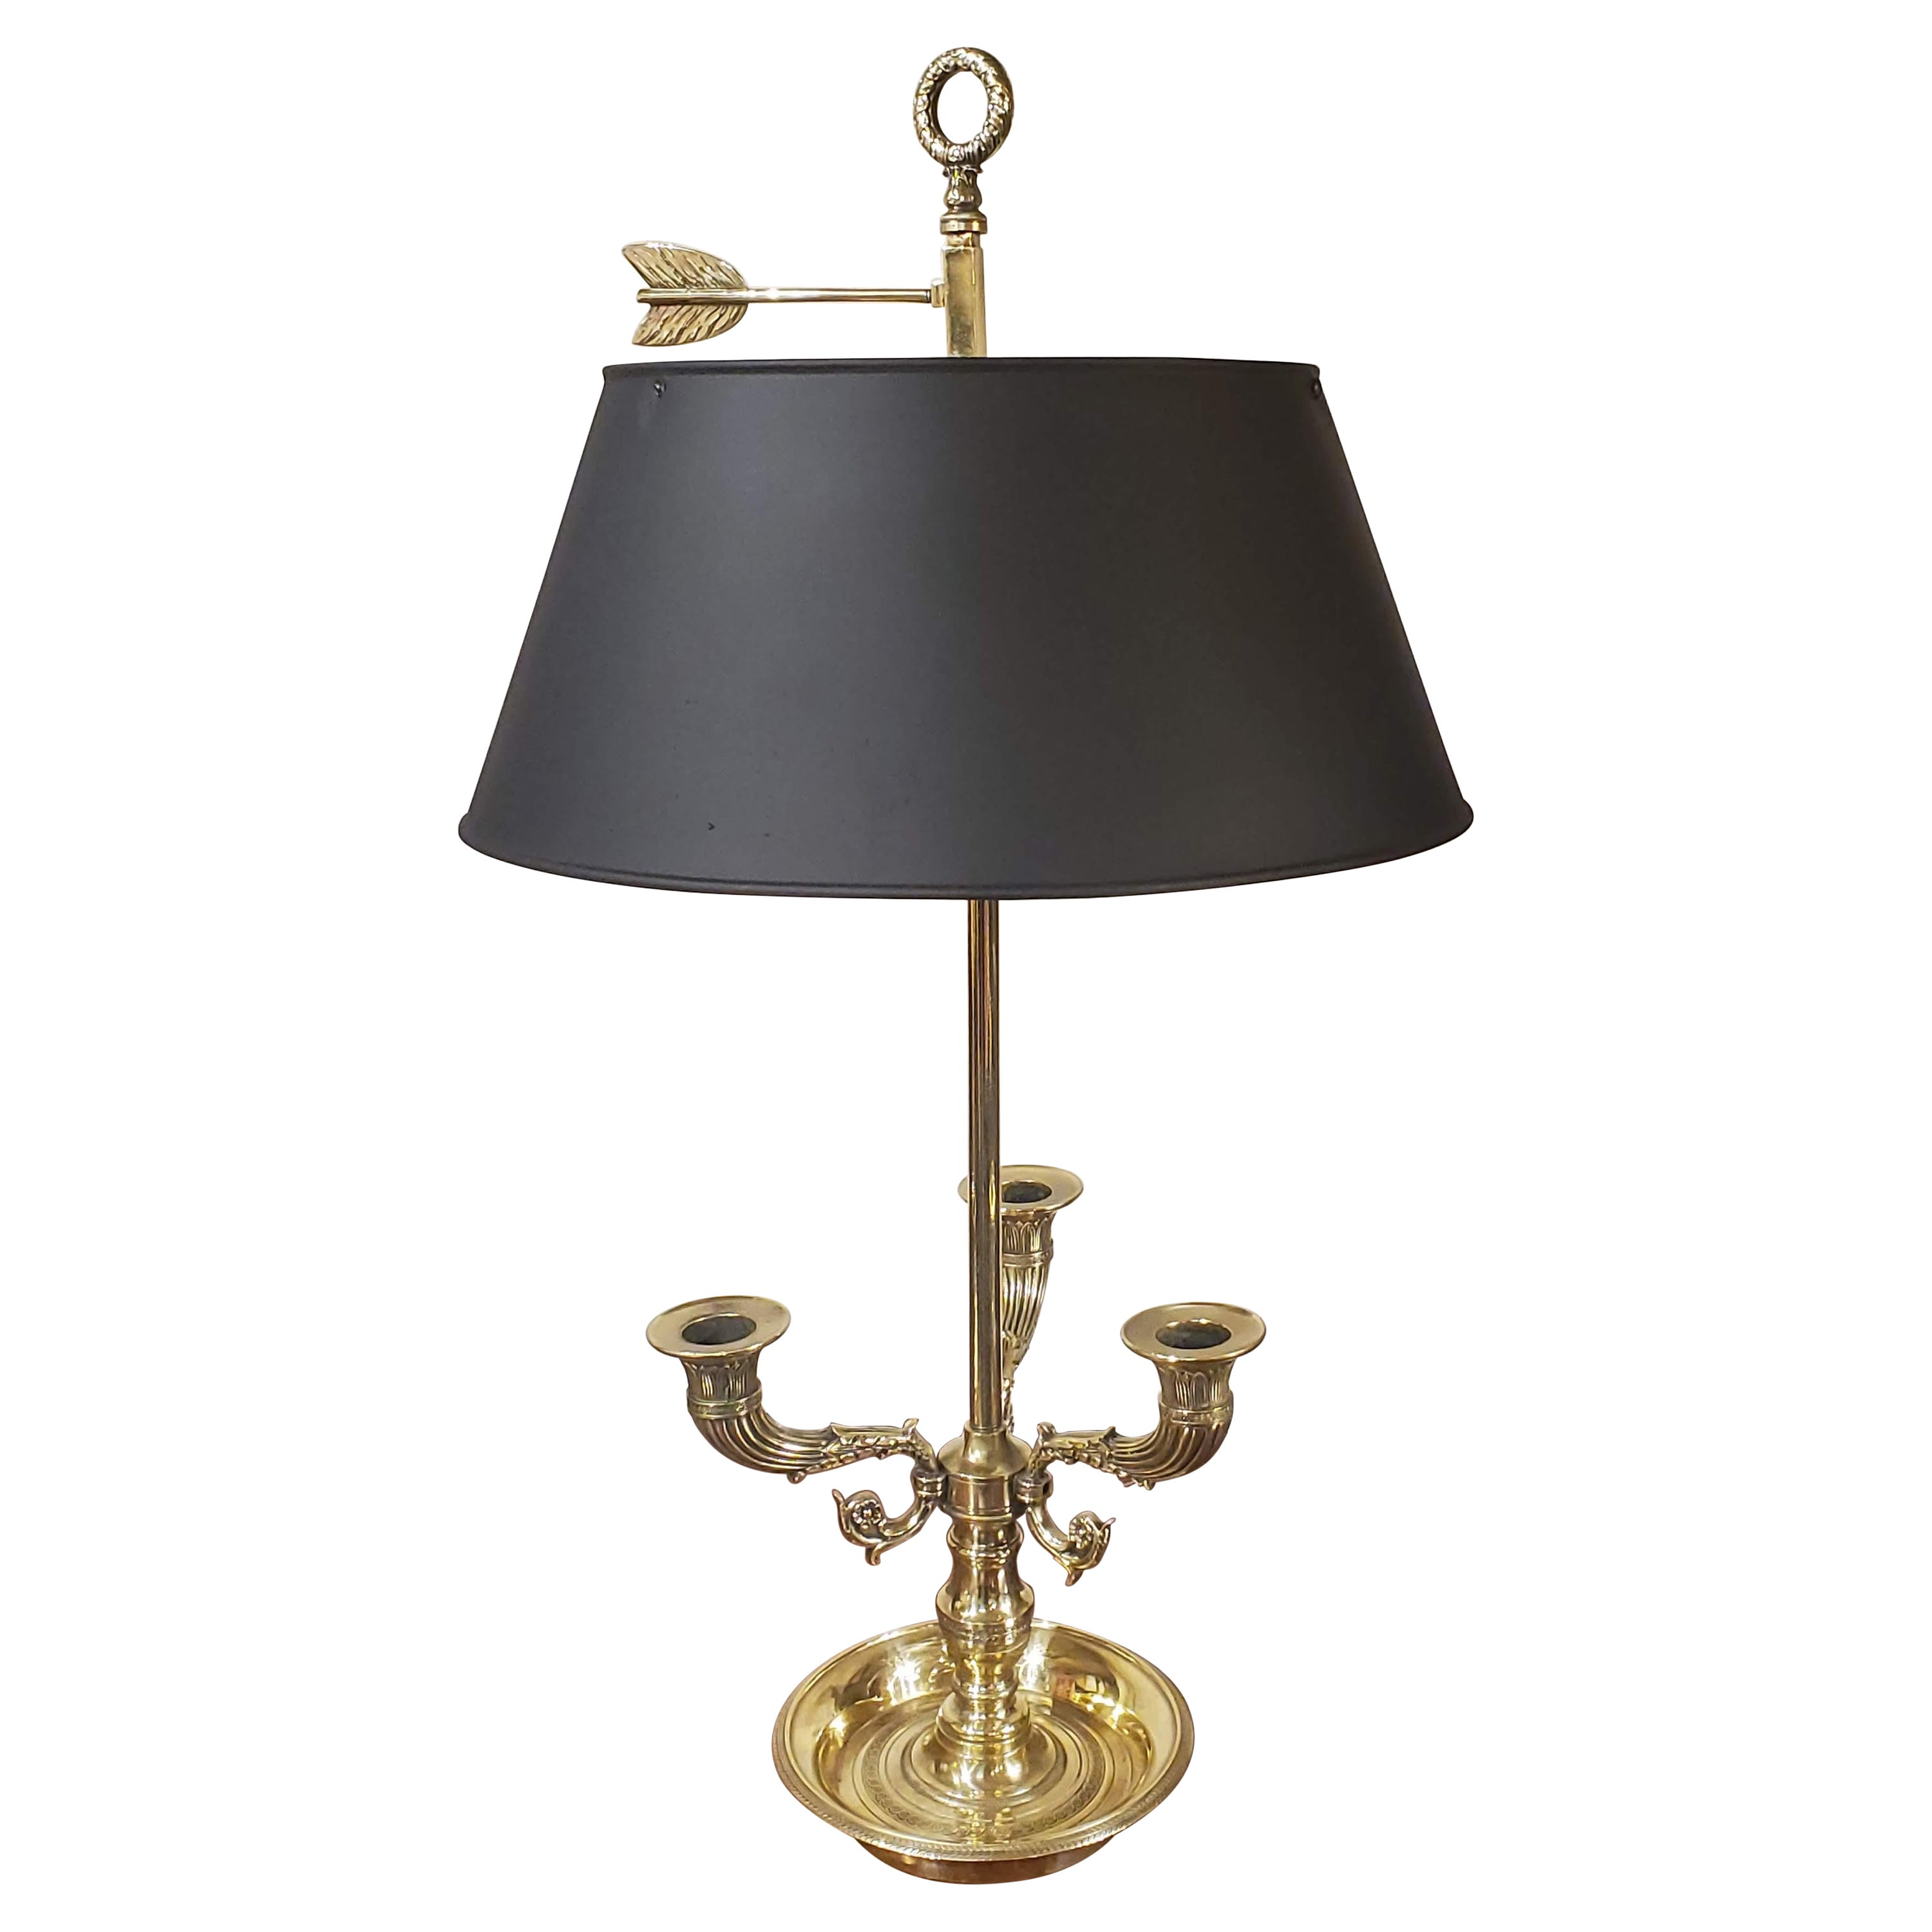 Early 19th Century French Provincial Brass Bouillotte Lamp with Black Oval Shade For Sale